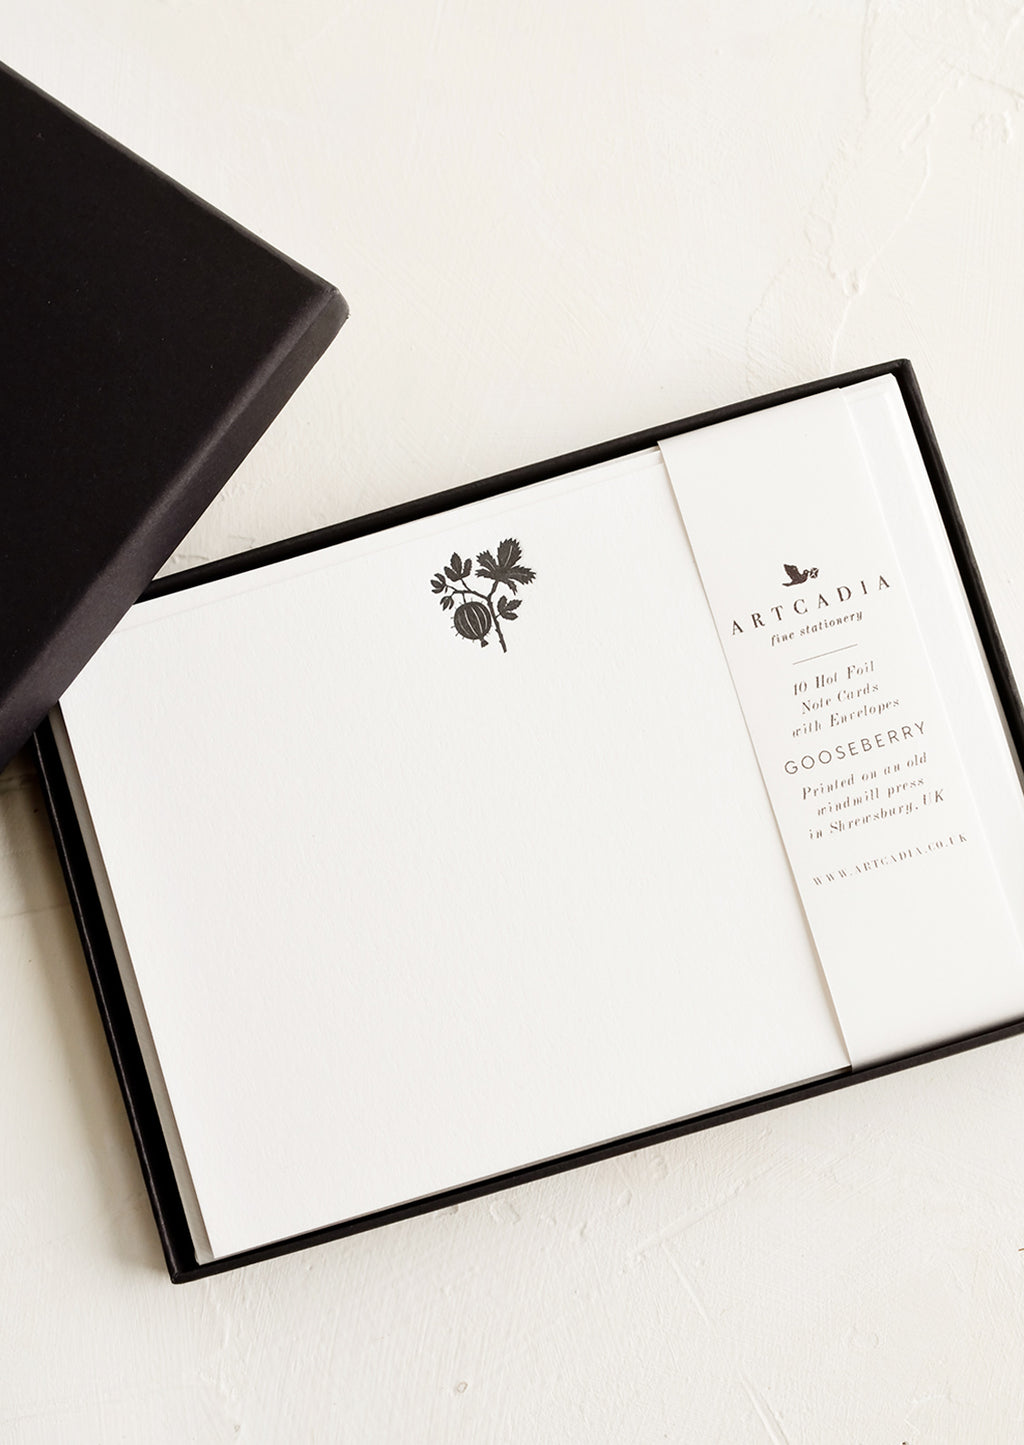 2: A black gift box containing botanical print stationery notecards.